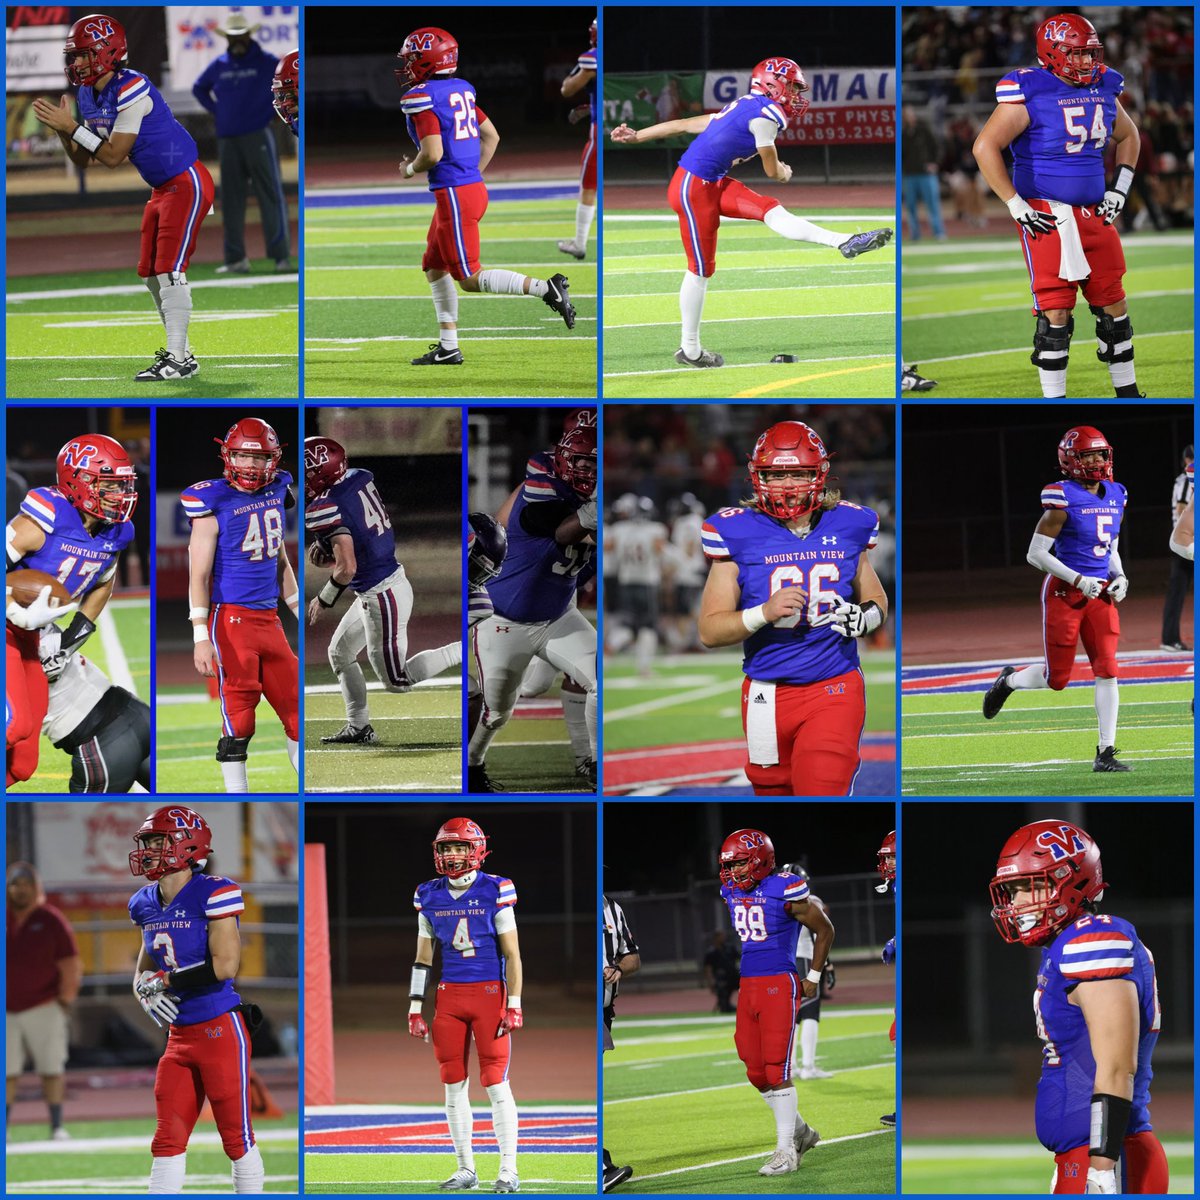 🎓🔷FOOTBALL SENIORS ♦️🎓 We will miss this great group of young men ❤️💙❤️❤️ Congratulations and Good luck.‼️ You will do amazing things in this world. Go get it ‼️ Class of ‘24 out #T4L